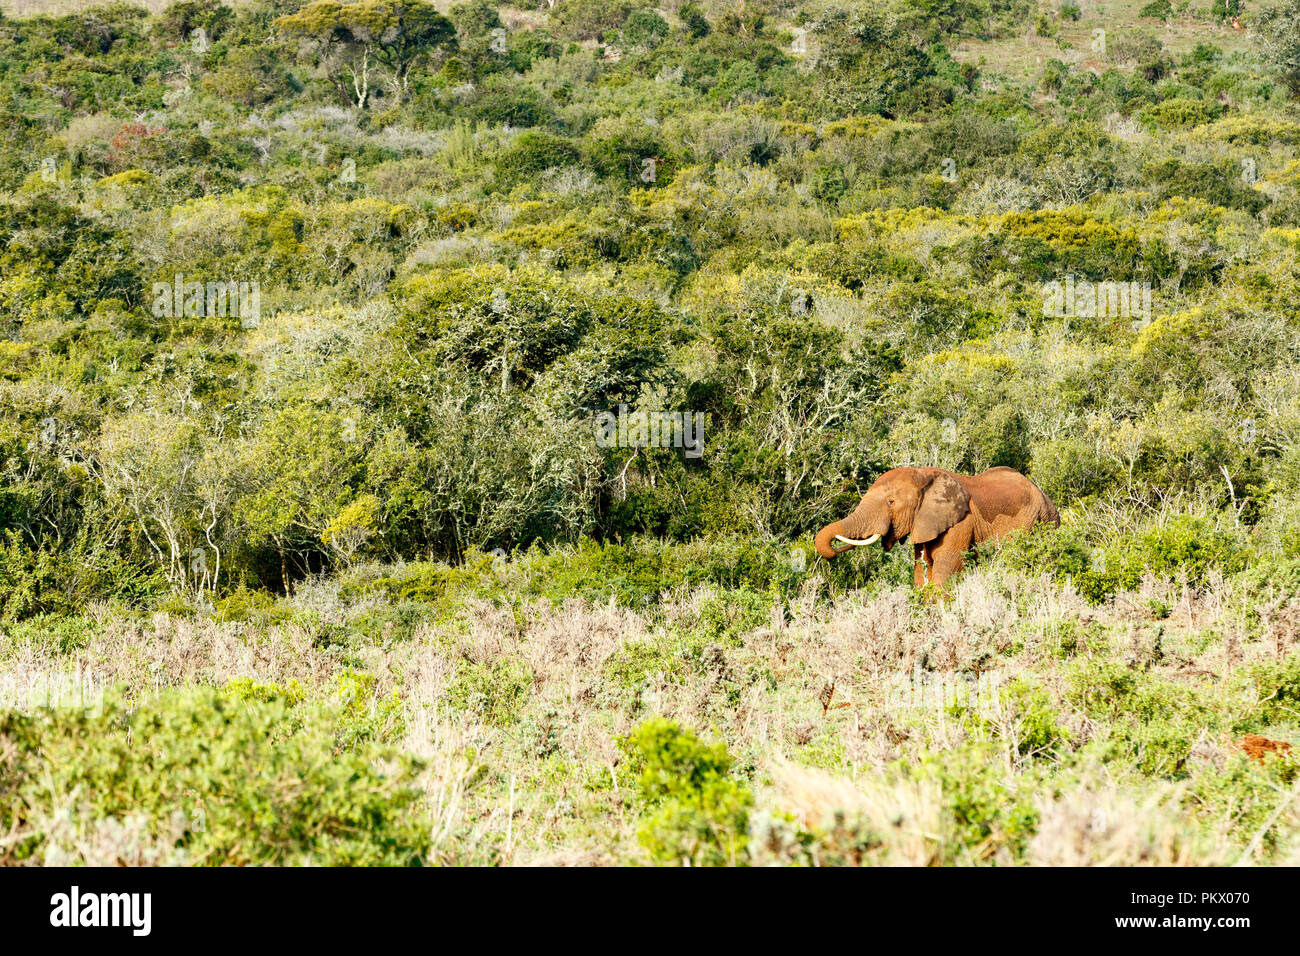 Elephant standing and eating between all the bushes in the field. Stock Photo